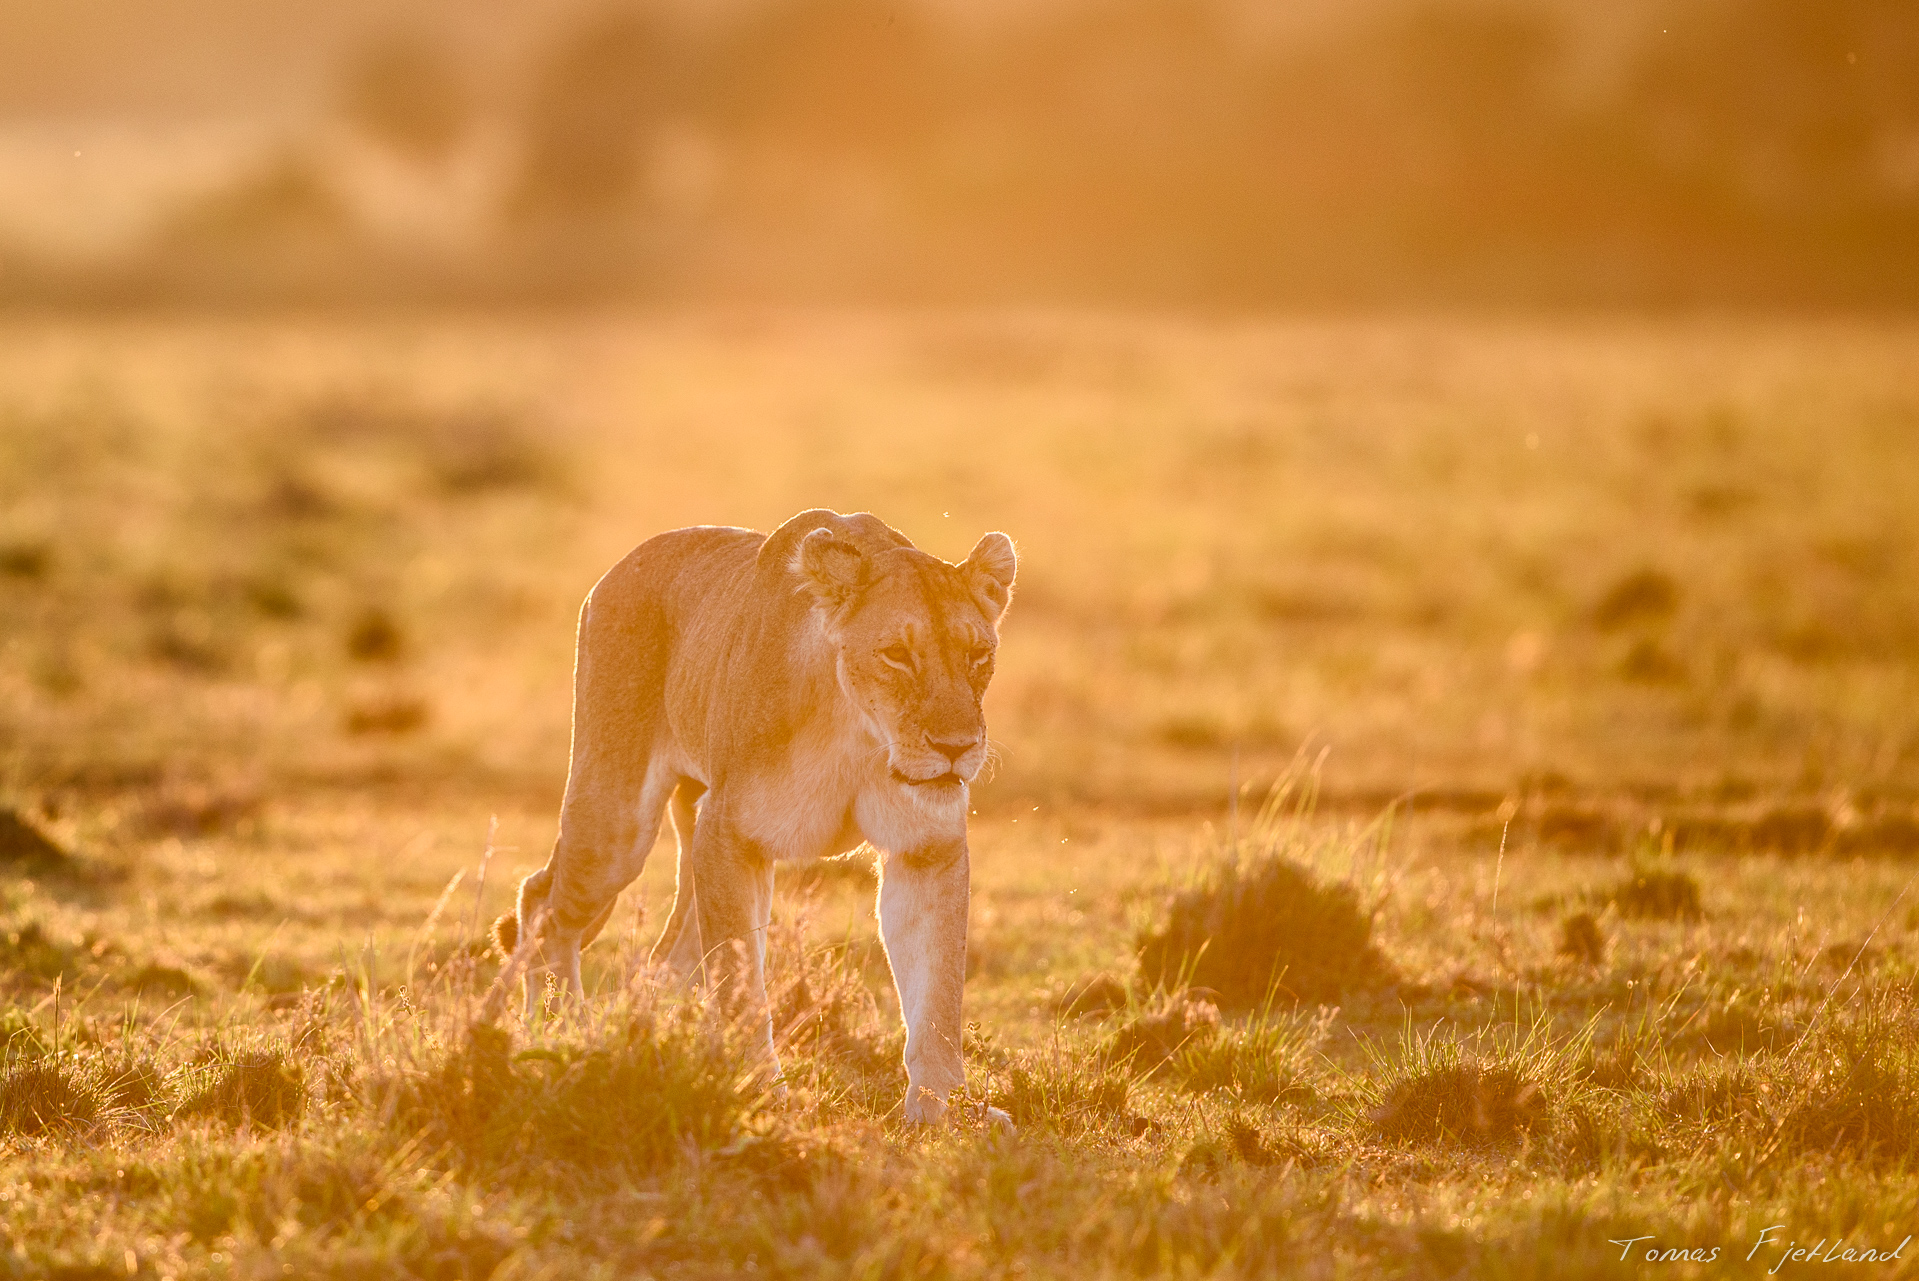 As the sun rises over the Mara, the incredible warm light floods everything for a few magical moments.